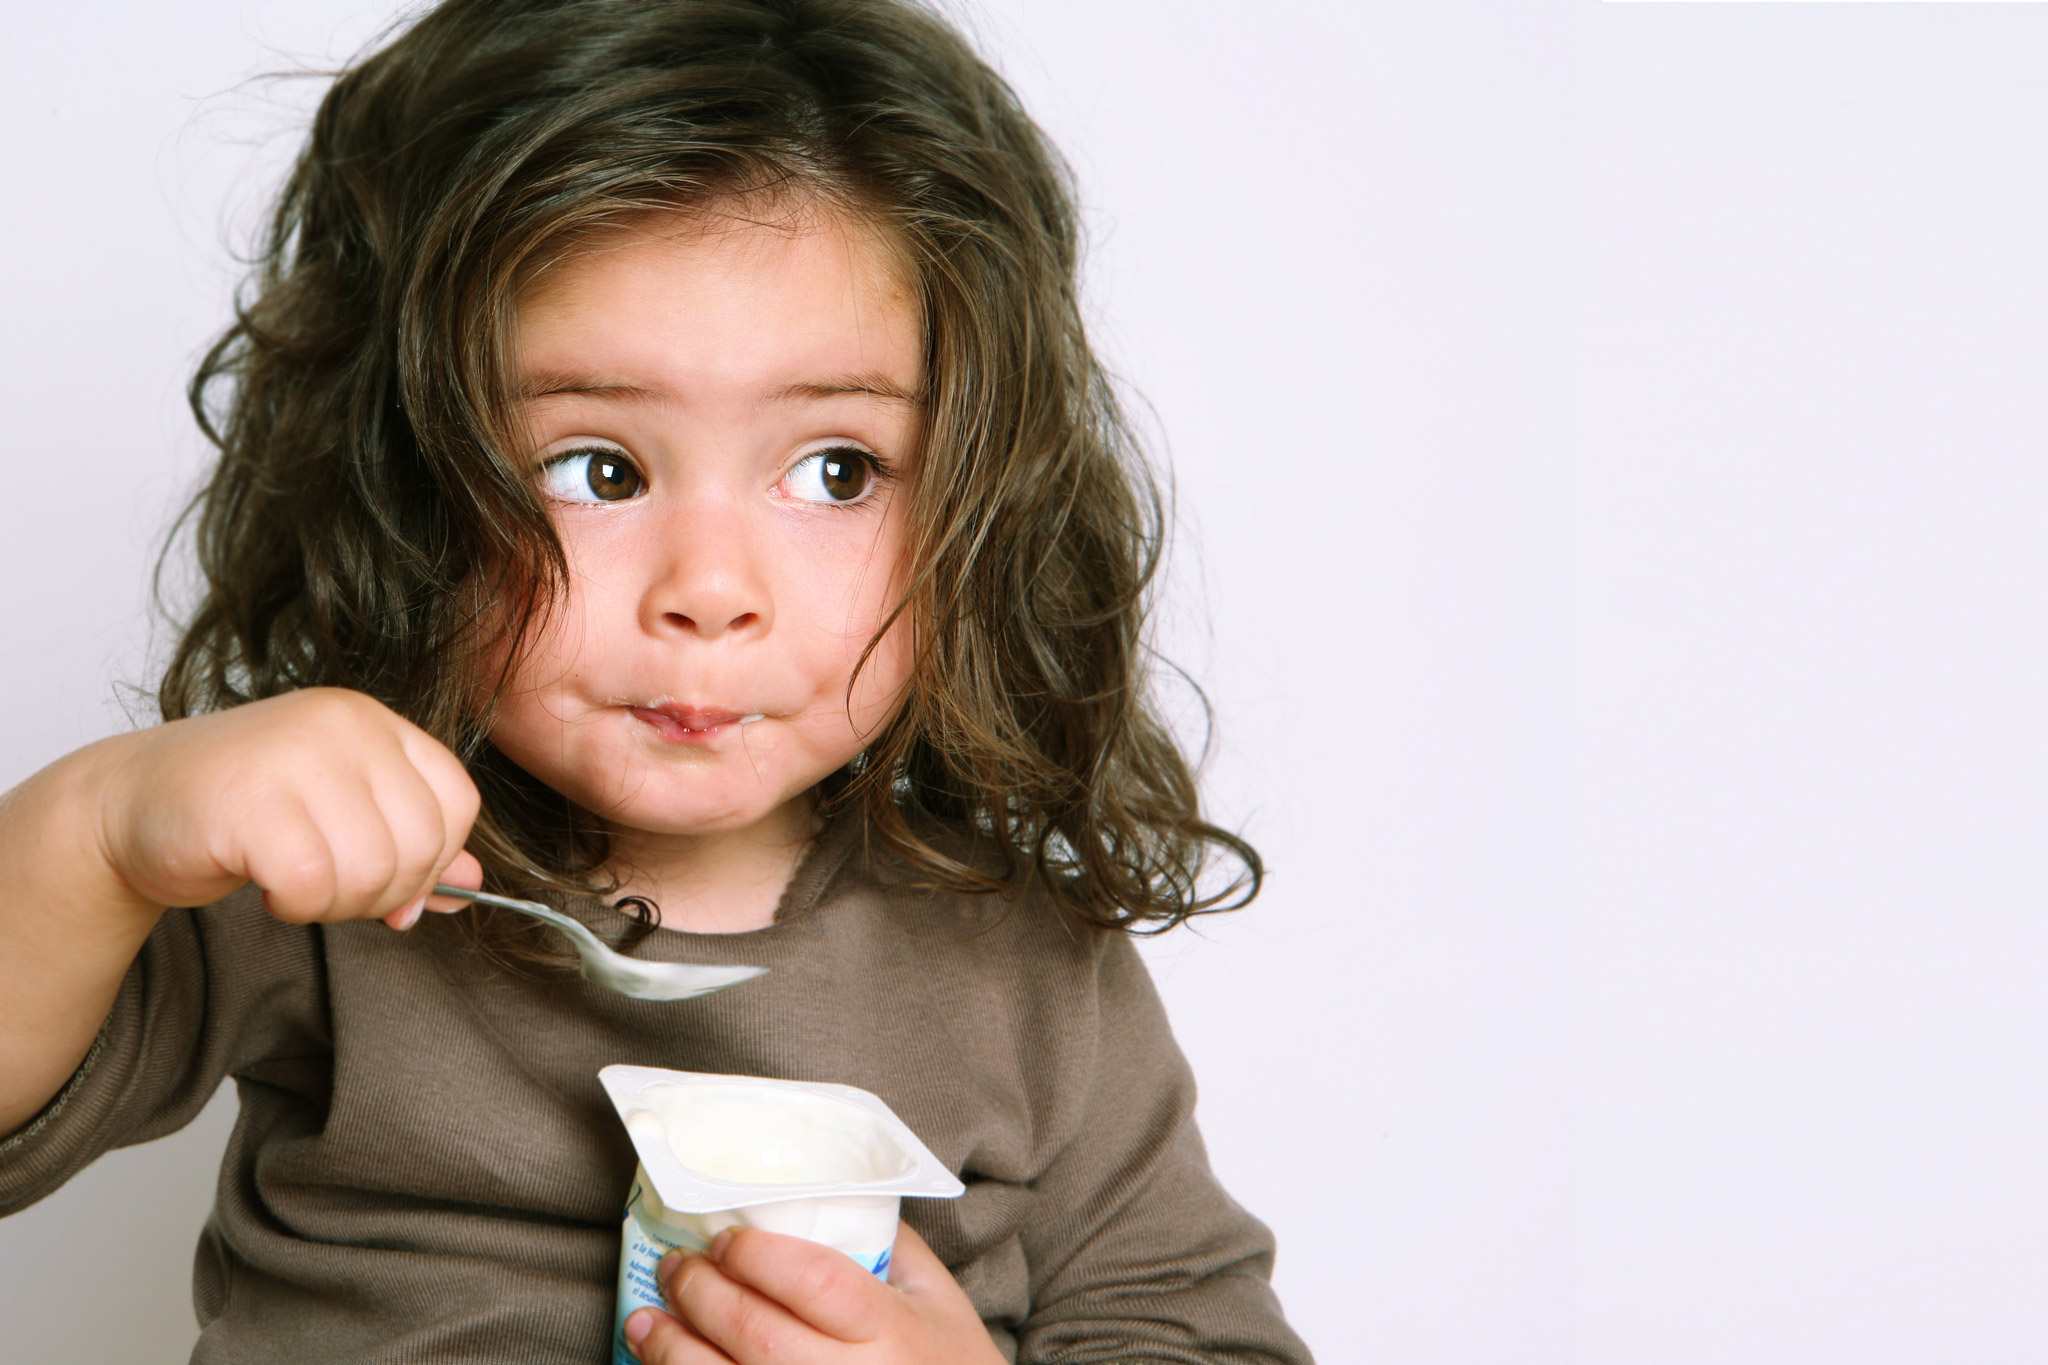 Young girl eating yogurt with a funny look on her face.